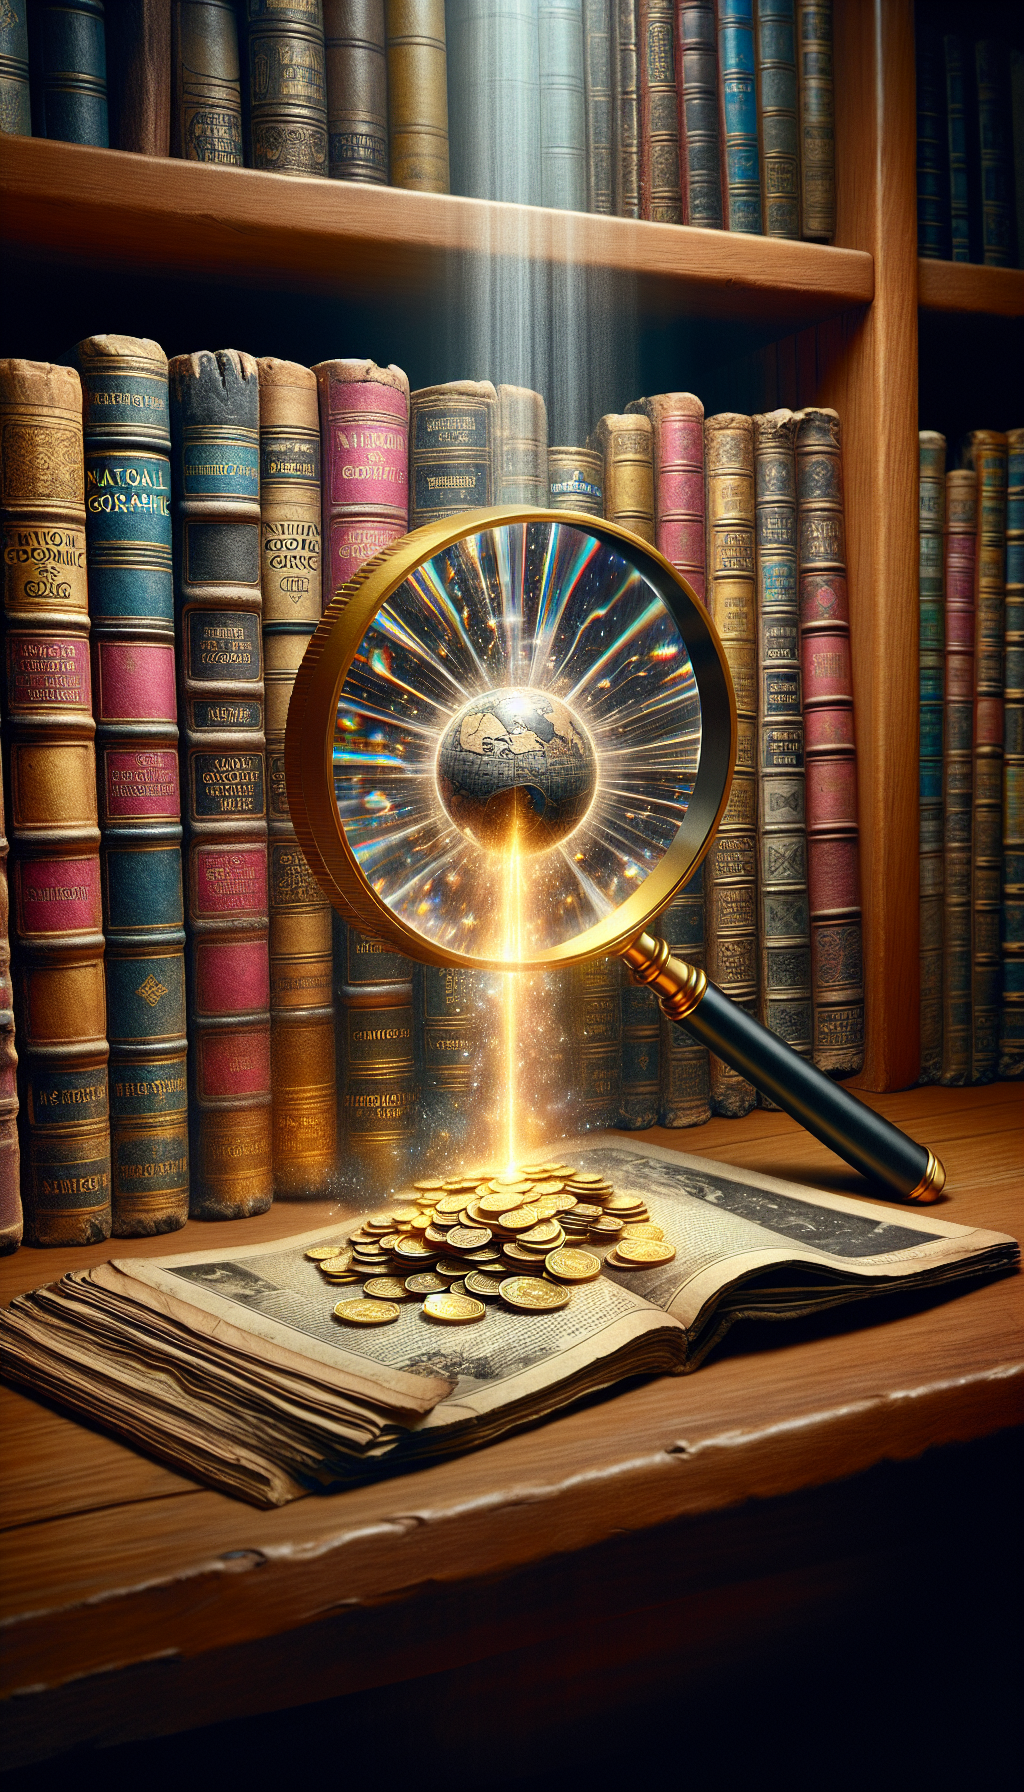 An old, wooden bookshelf groans under the weight of colorful, weathered National Geographic spines, with a magnifying glass hovering over, transforming dusty volumes into glimmering gold coins as it scrutinizes them. Each magazine touched by the glass's beam bursts with a price tag that reflects its newfound treasure status, symbolizing the hidden wealth within vintage issues.